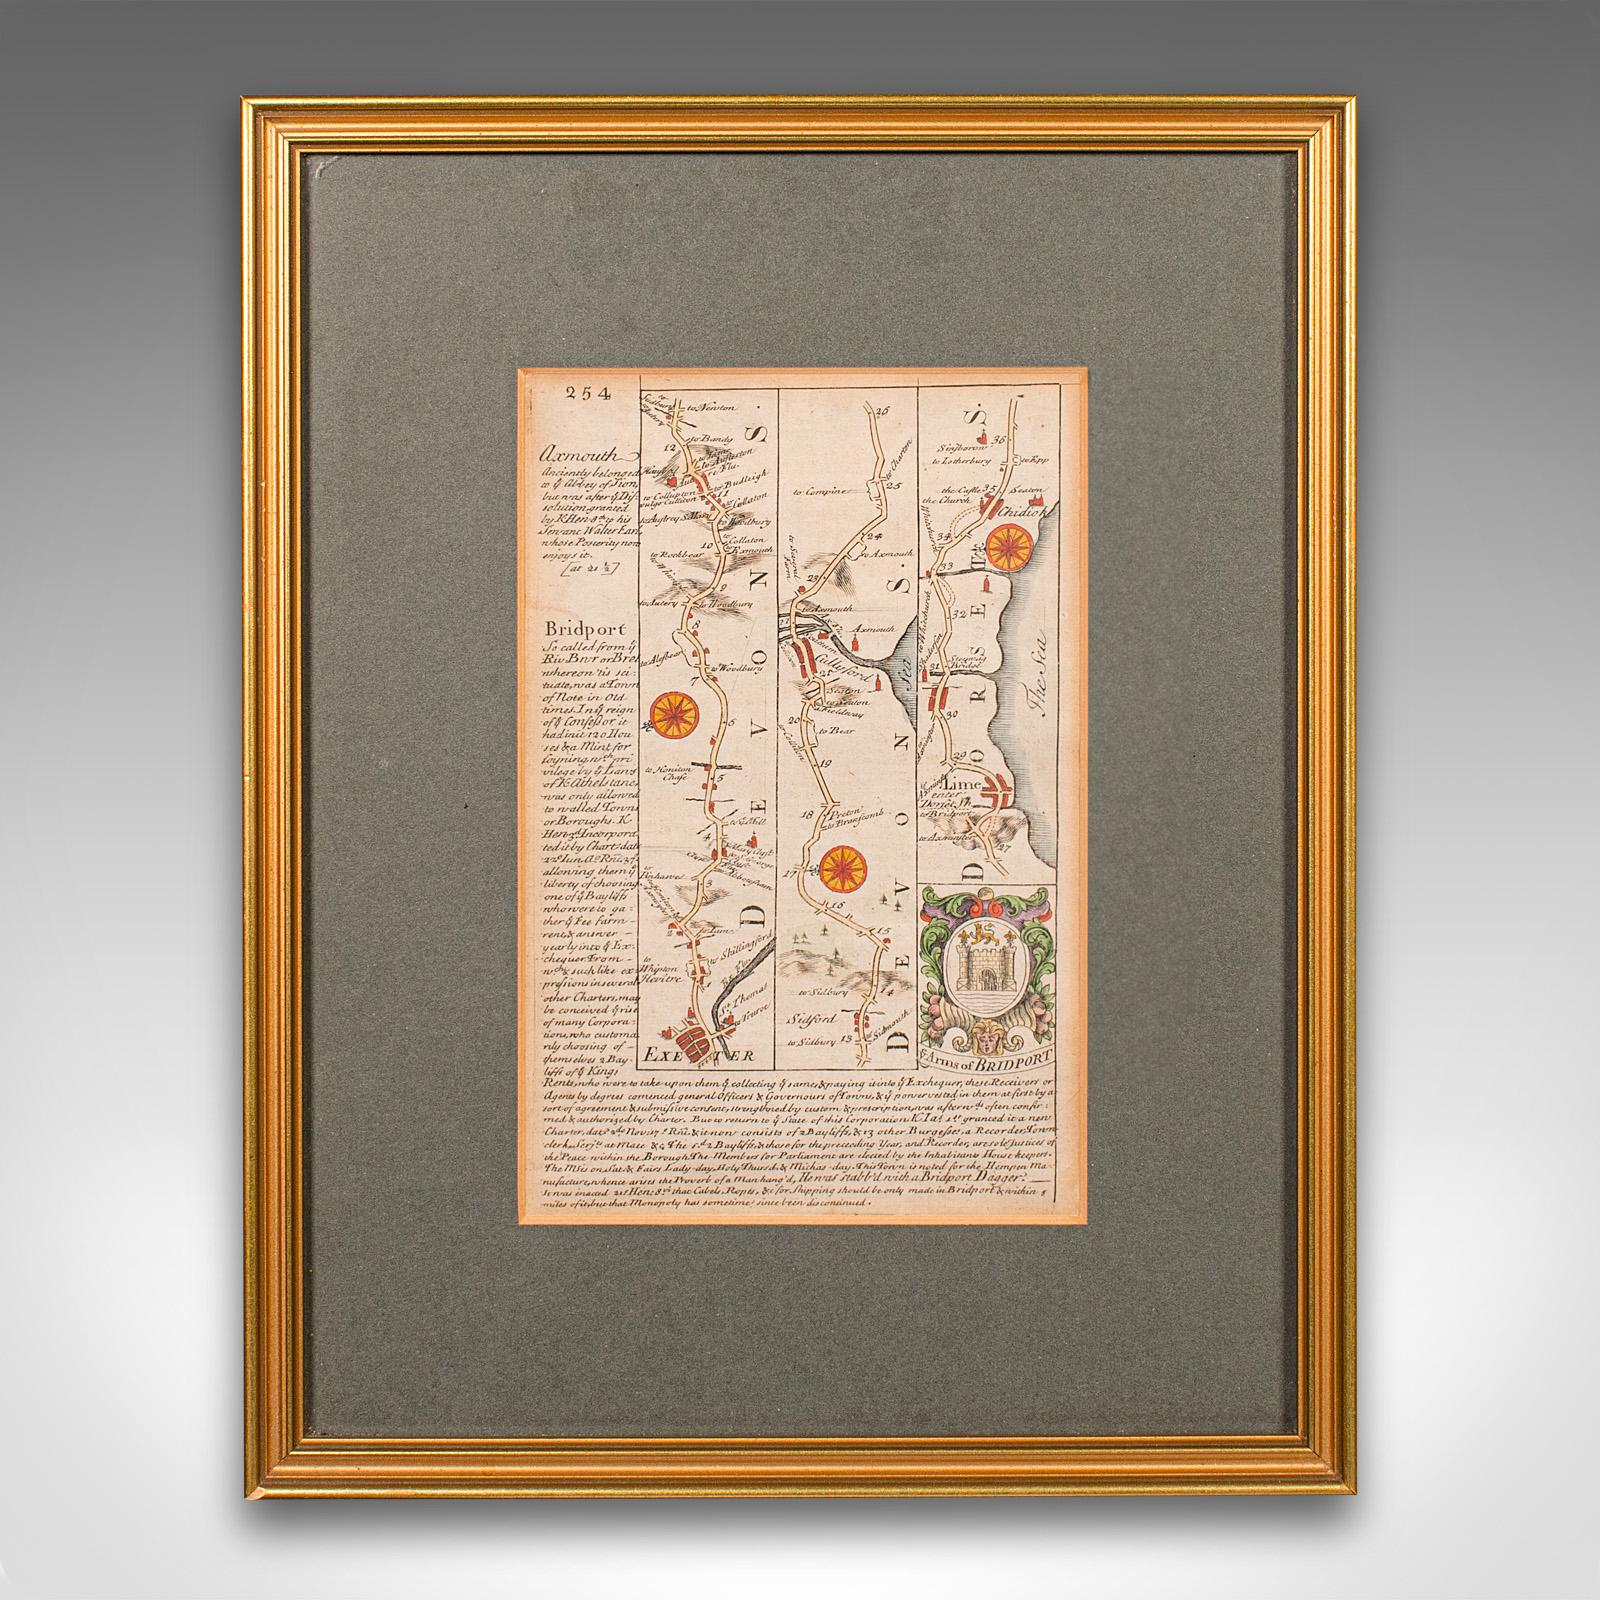 This is an antique coach road map of East Devon. An English, framed lithograph engraving of regional interest, dating to the early 18th century and later.

Fascinating 18th century highway cartography of Exeter to Bridport
Displays a desirable aged